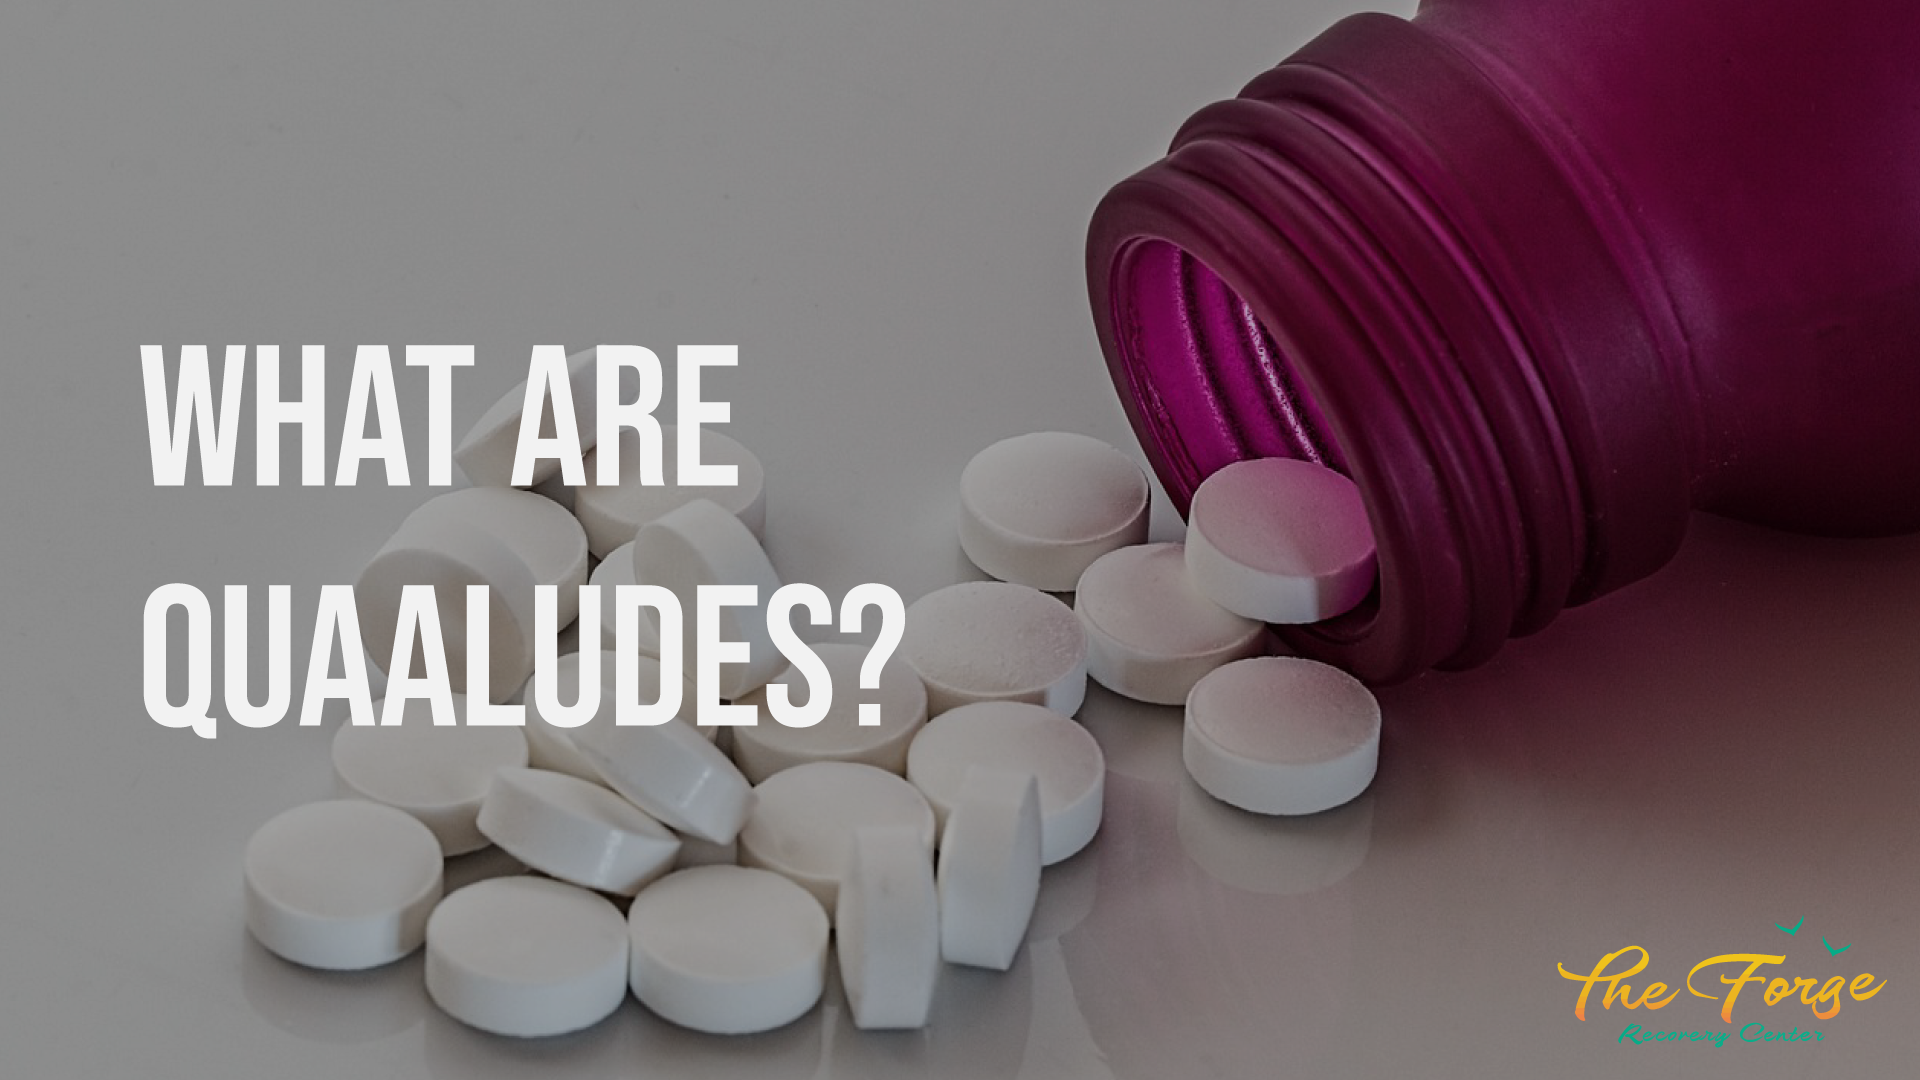 Quaaludes: Learn About This Old-School Tranquilizer & Why It’s Still Dangerous